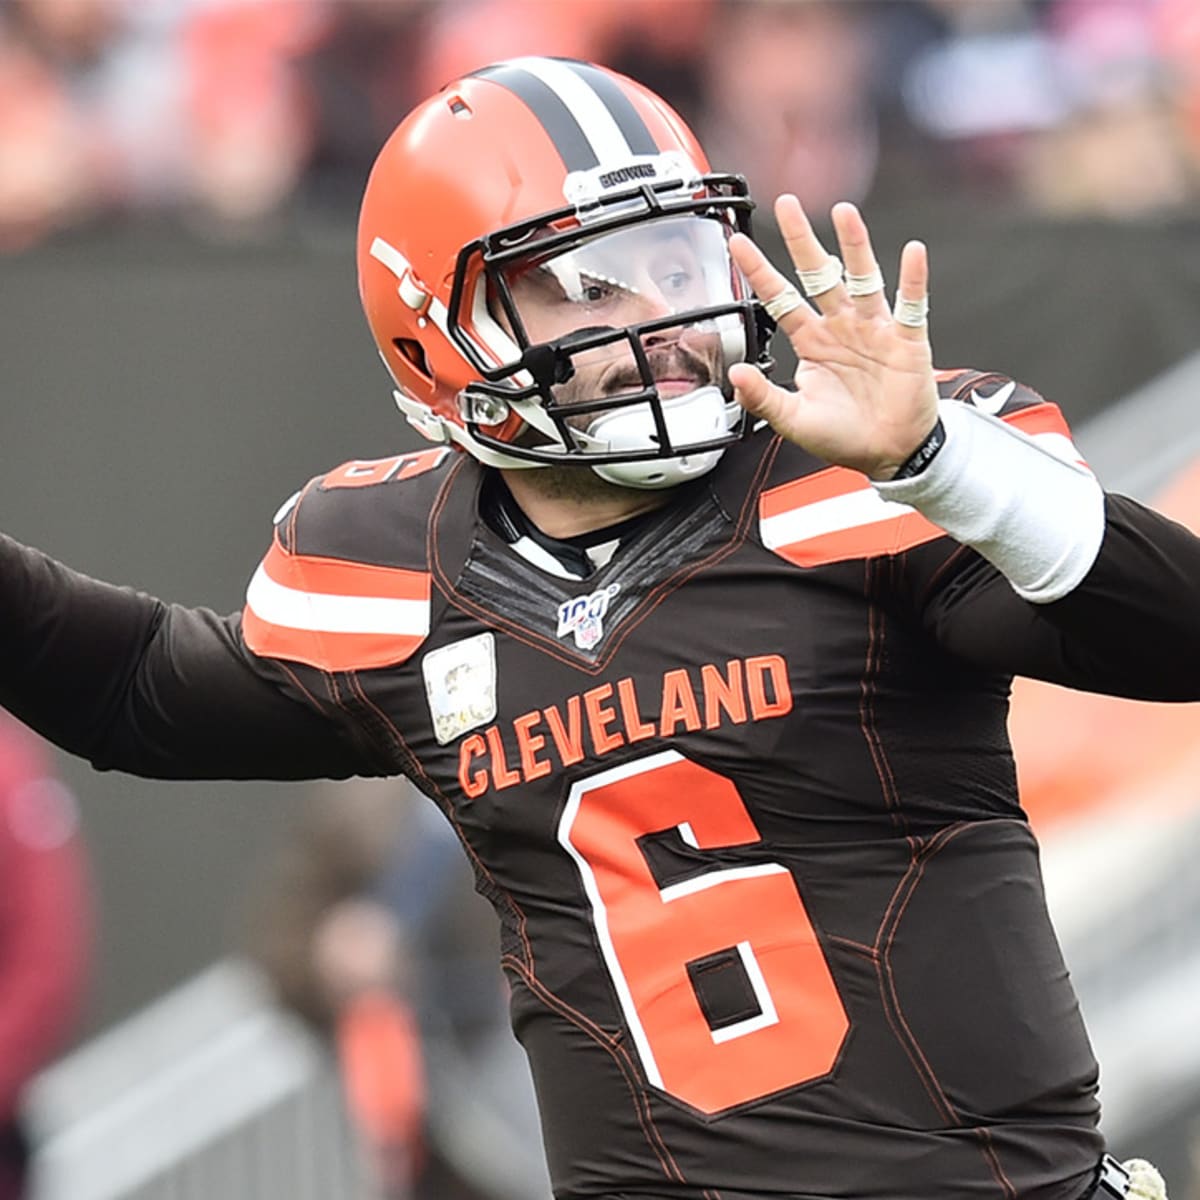 Pittsburgh Steelers vs. Cleveland Browns: Live Stream, TV Channel